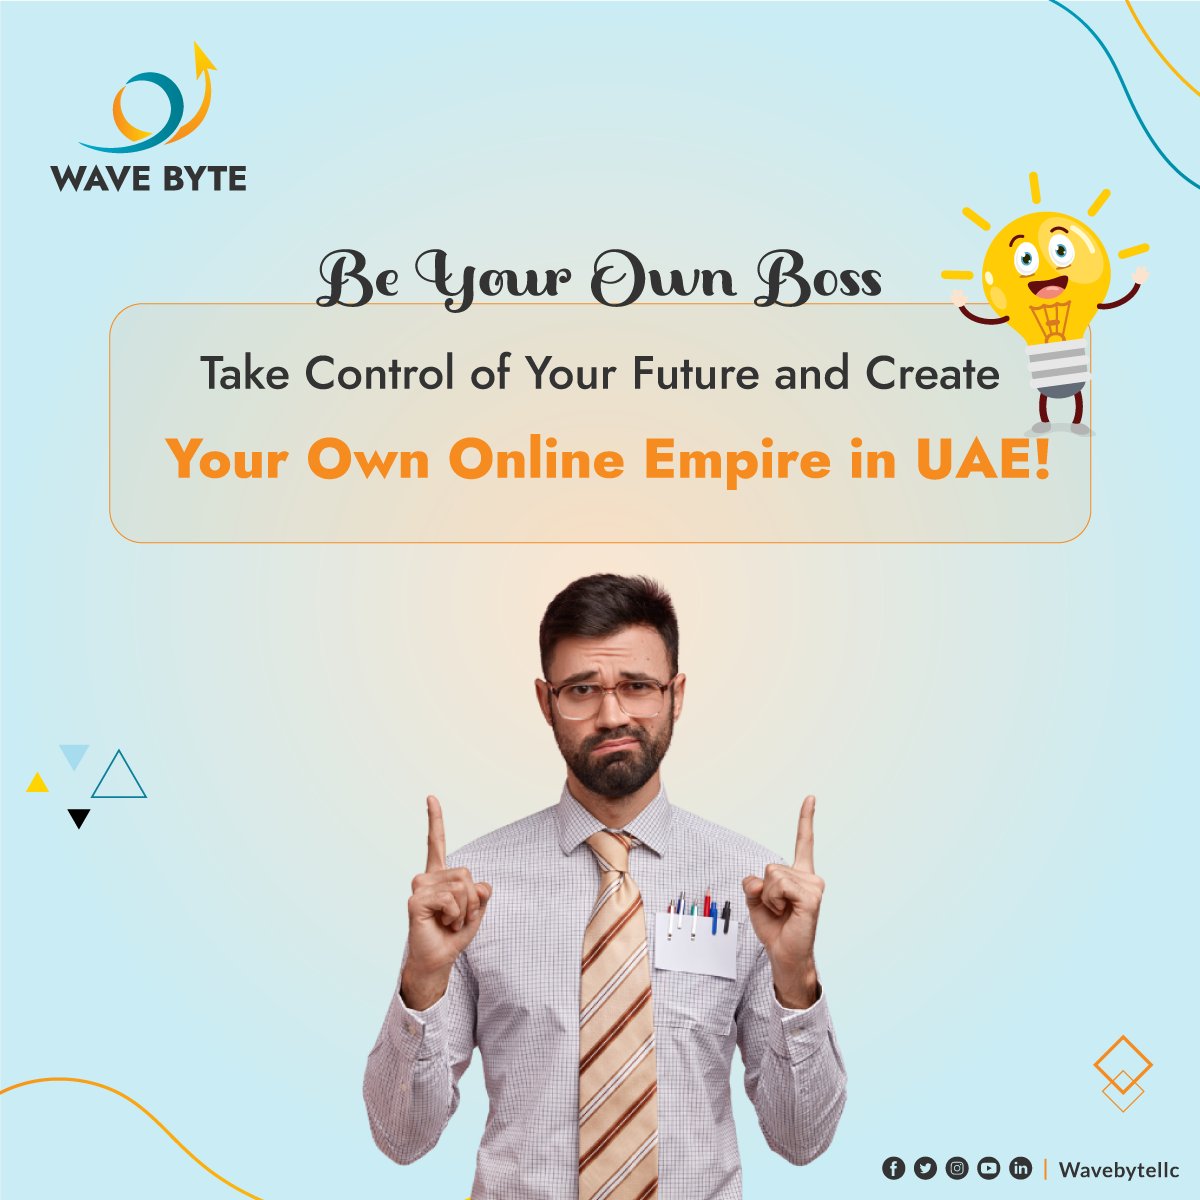 The digital landscape is ripe with opportunities, and the UAE is the perfect stage for your entrepreneurial journey. Whether you have a passion for fashion, technology, or anything in between.

#Entrepreneurship #OnlineEmpire #UAEBusiness  #BeYourOwnBoss #Wavebyte